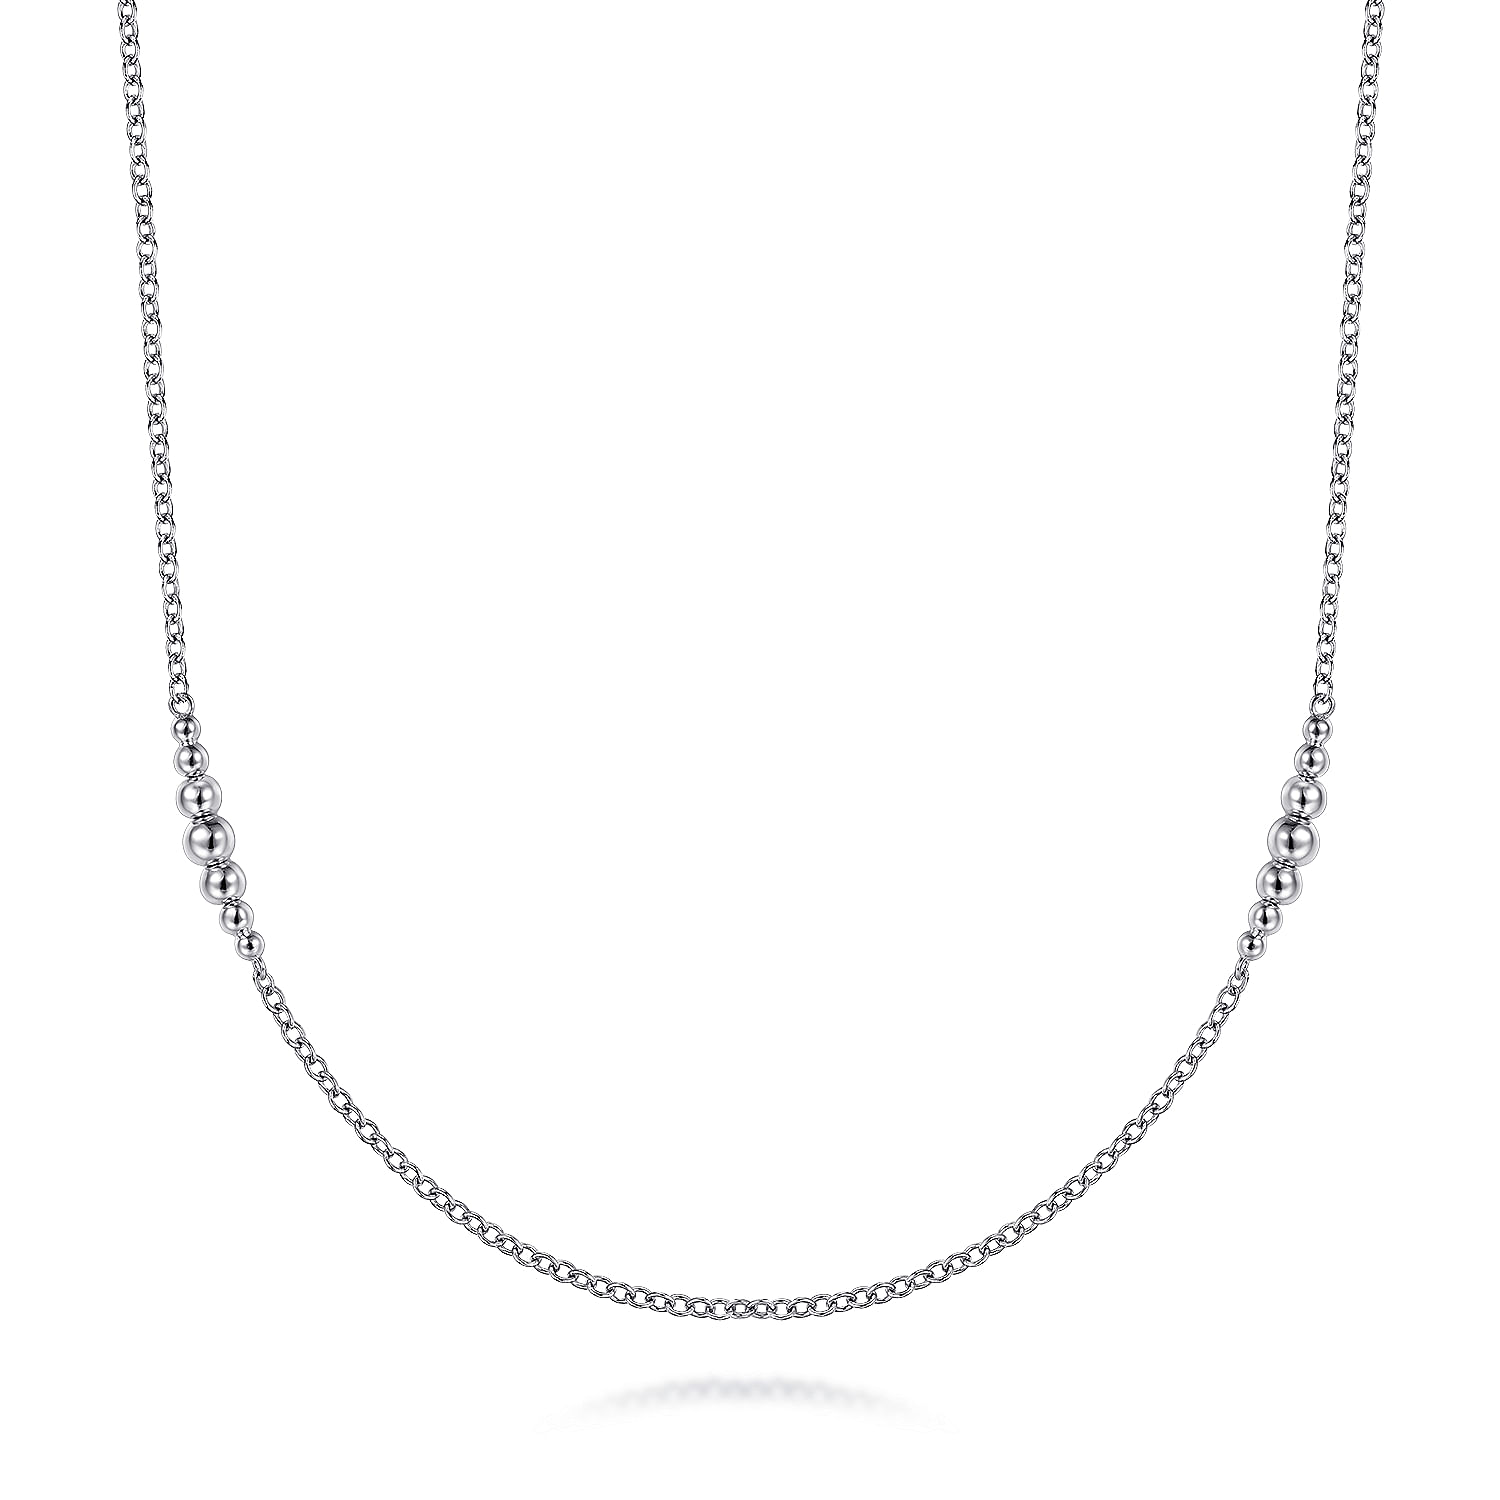  925 Sterling Silver Station Necklace